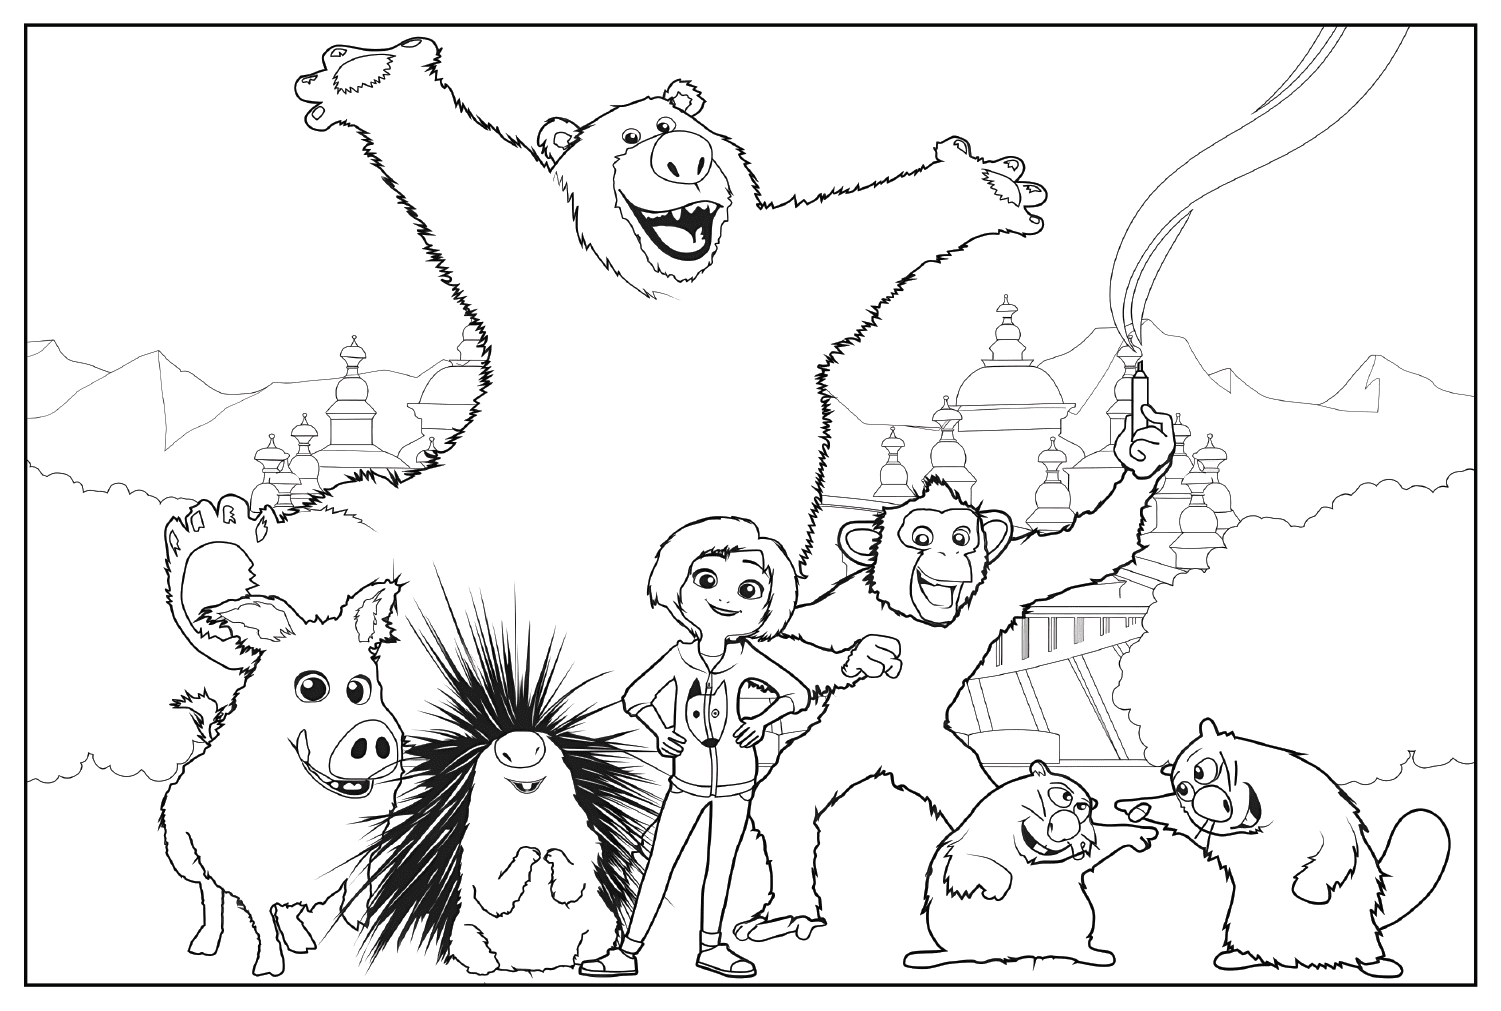 Adventures in Wonder Park Coloring Page to Print from Adventures in Wonder Park